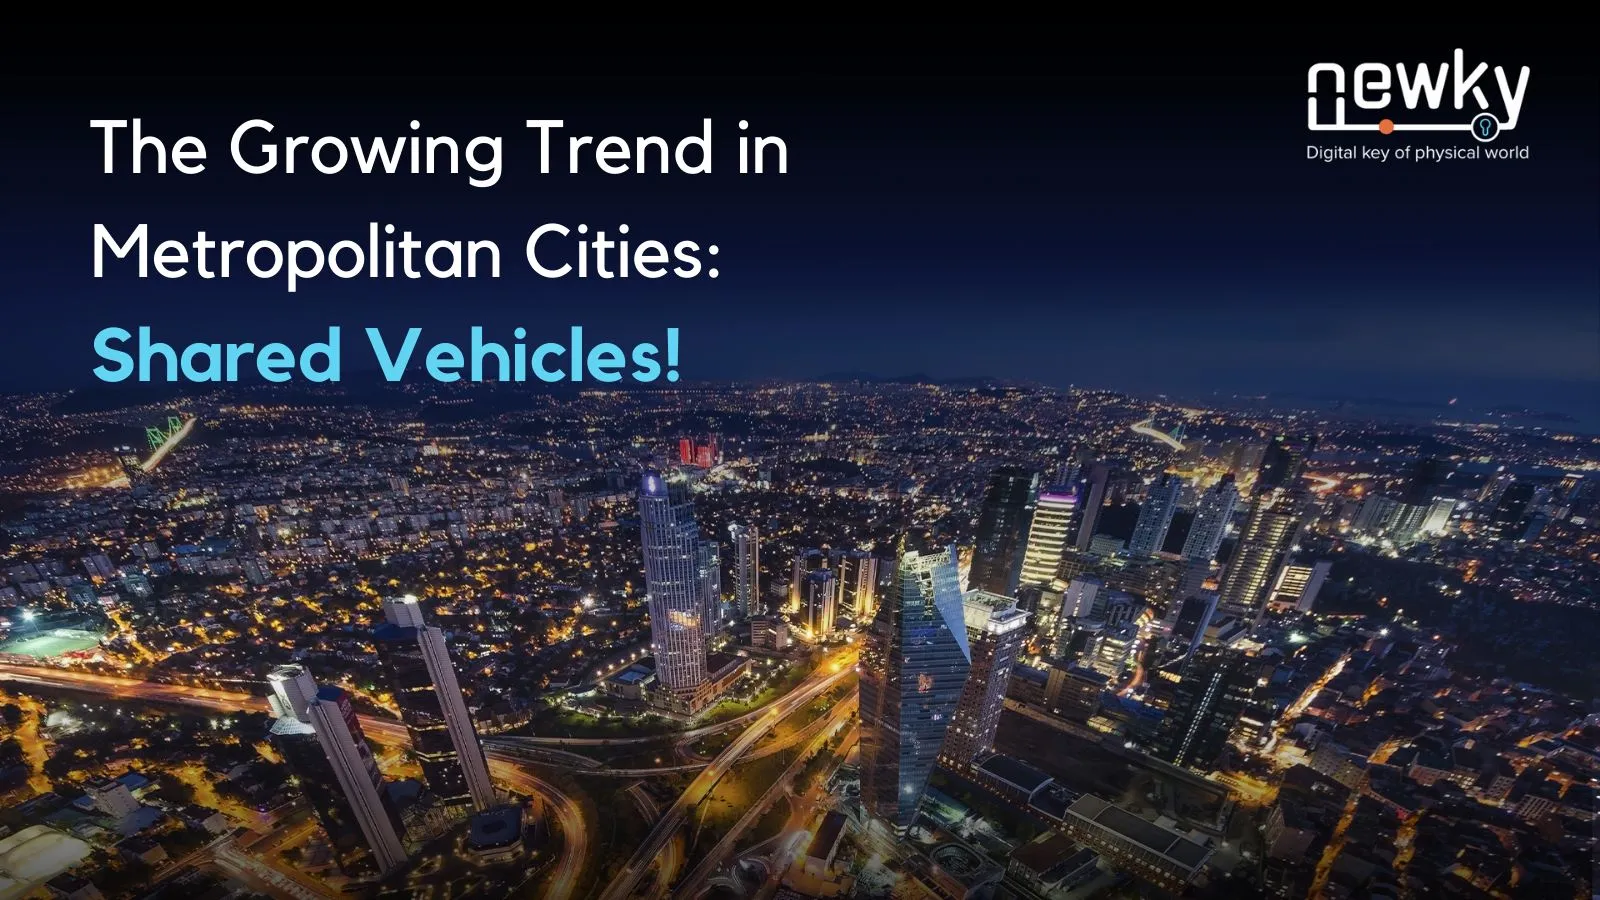 Shared Vehicles, a Growing Trend in Big Cities!